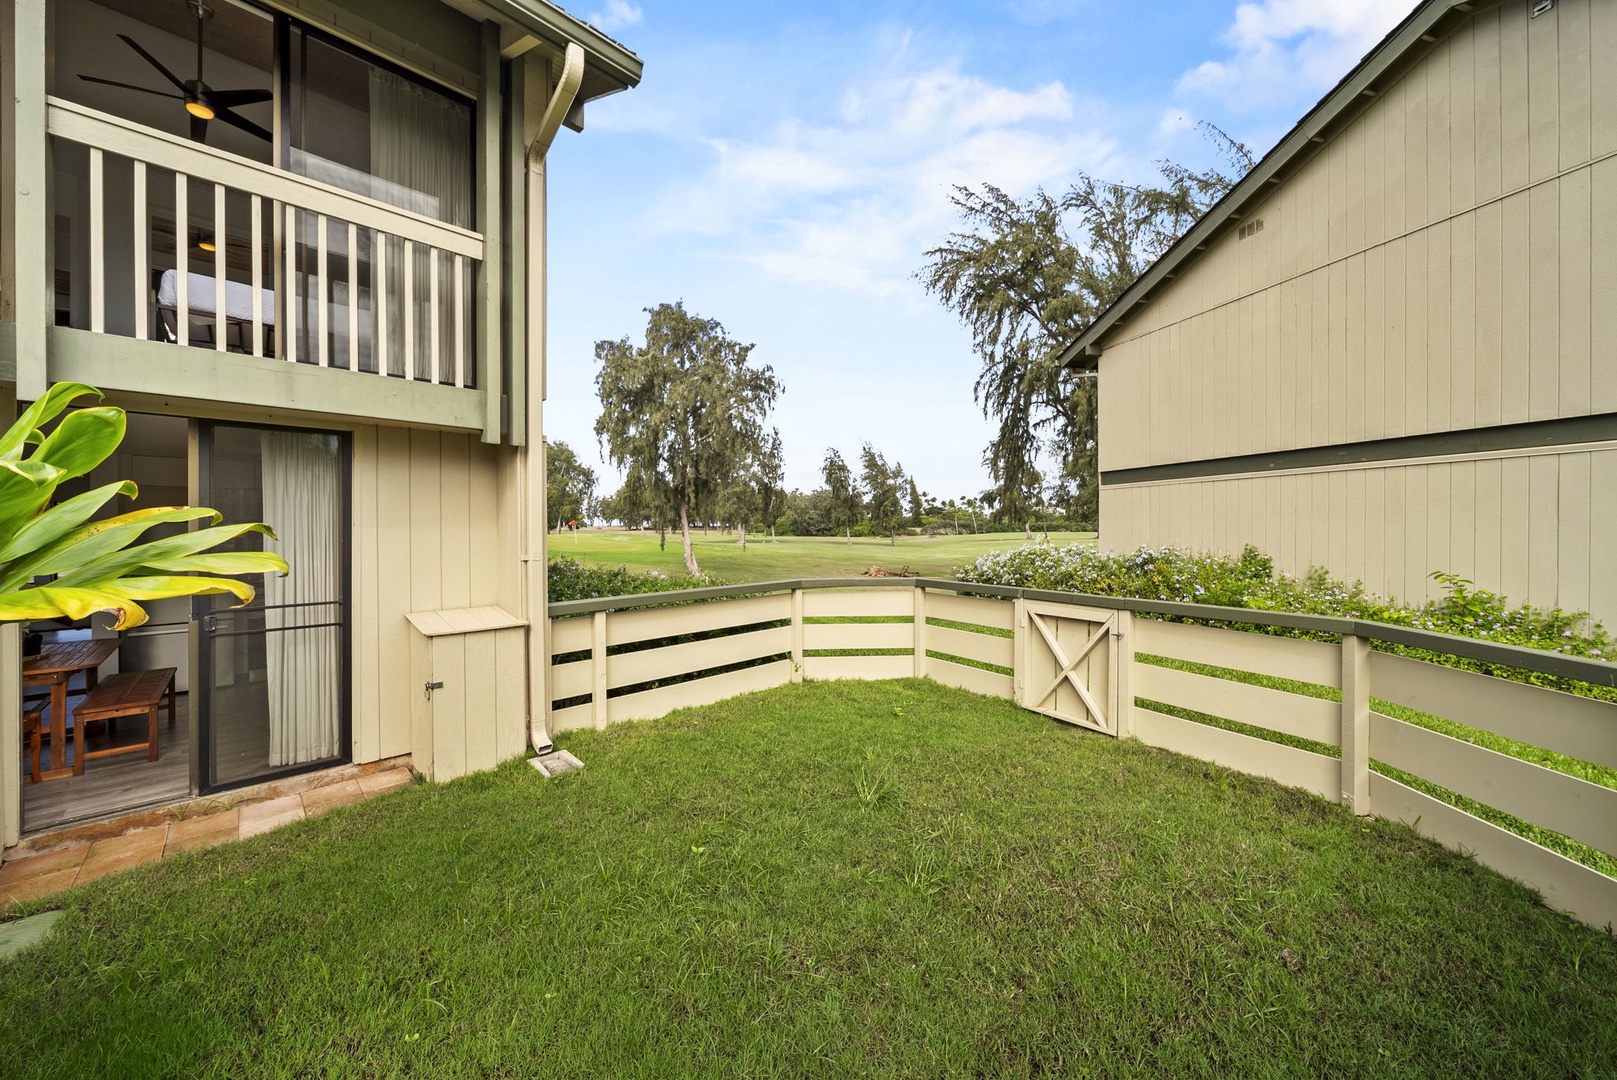 Kahuku Vacation Rentals, Kuilima Estates West #85 - Private, fenced in yard just outside the kitchen doors.